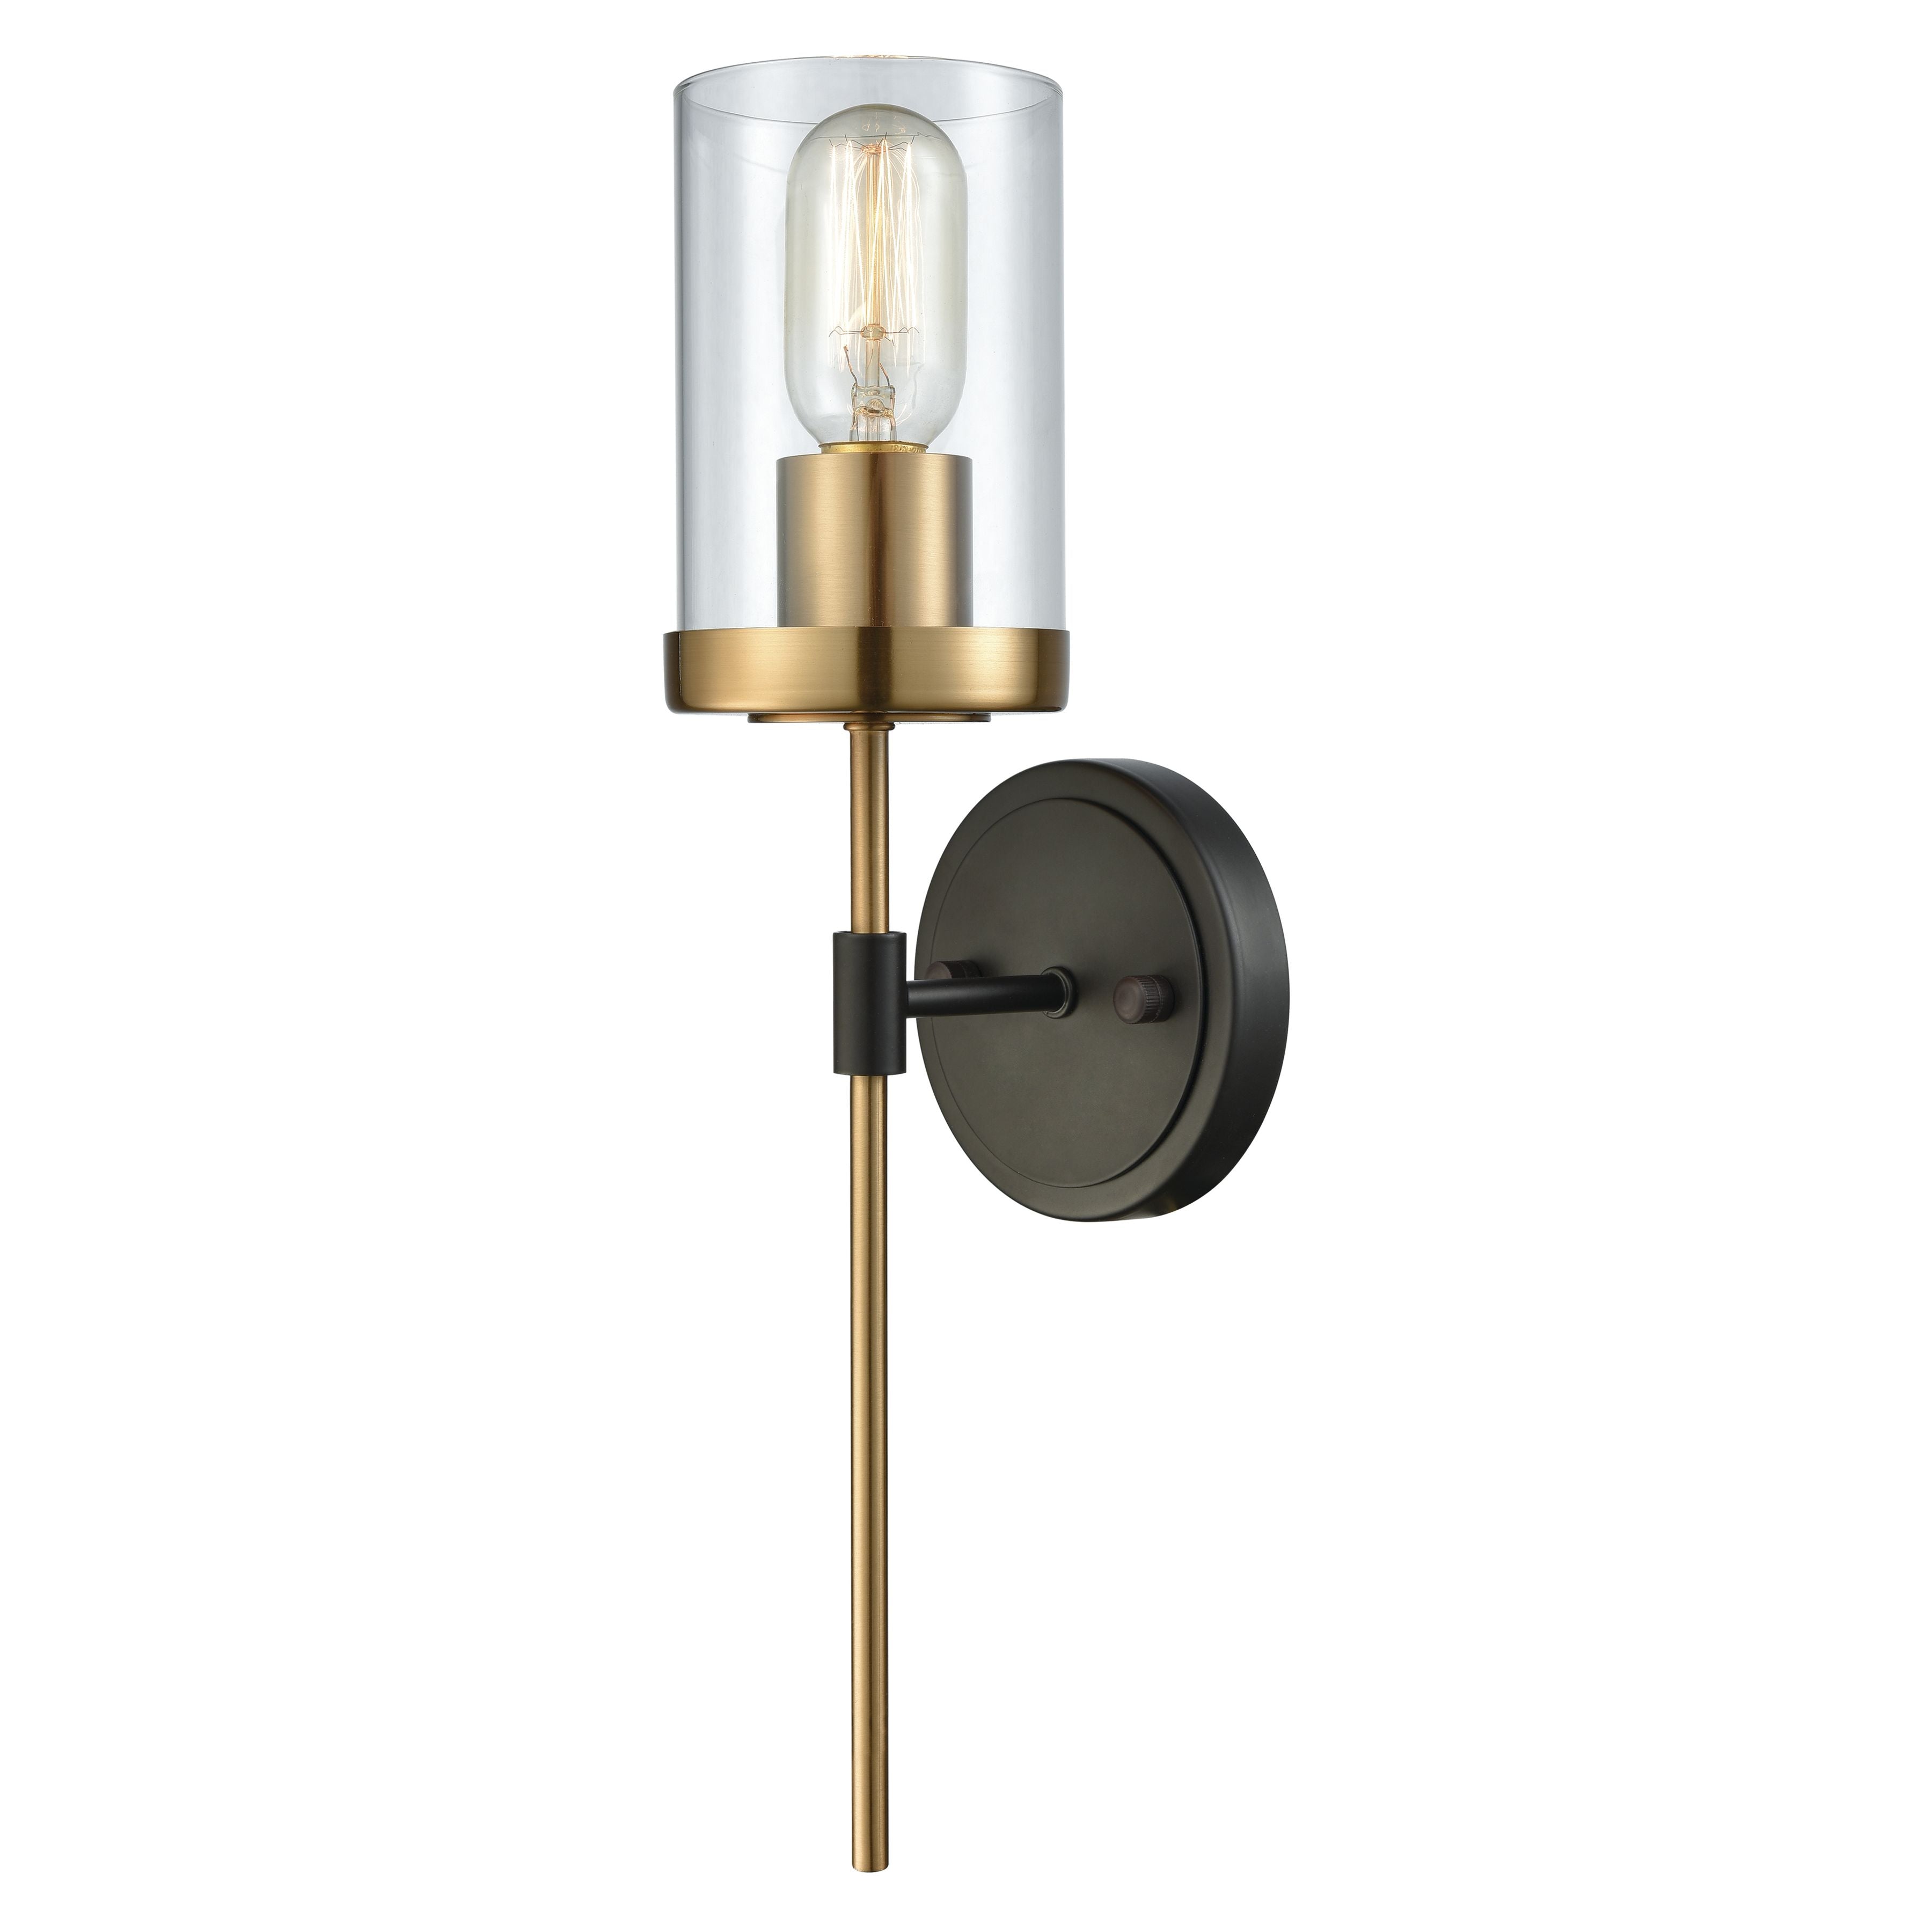 North Haven 17'' High 1-Light Sconce - Oil Rubbed Bronze